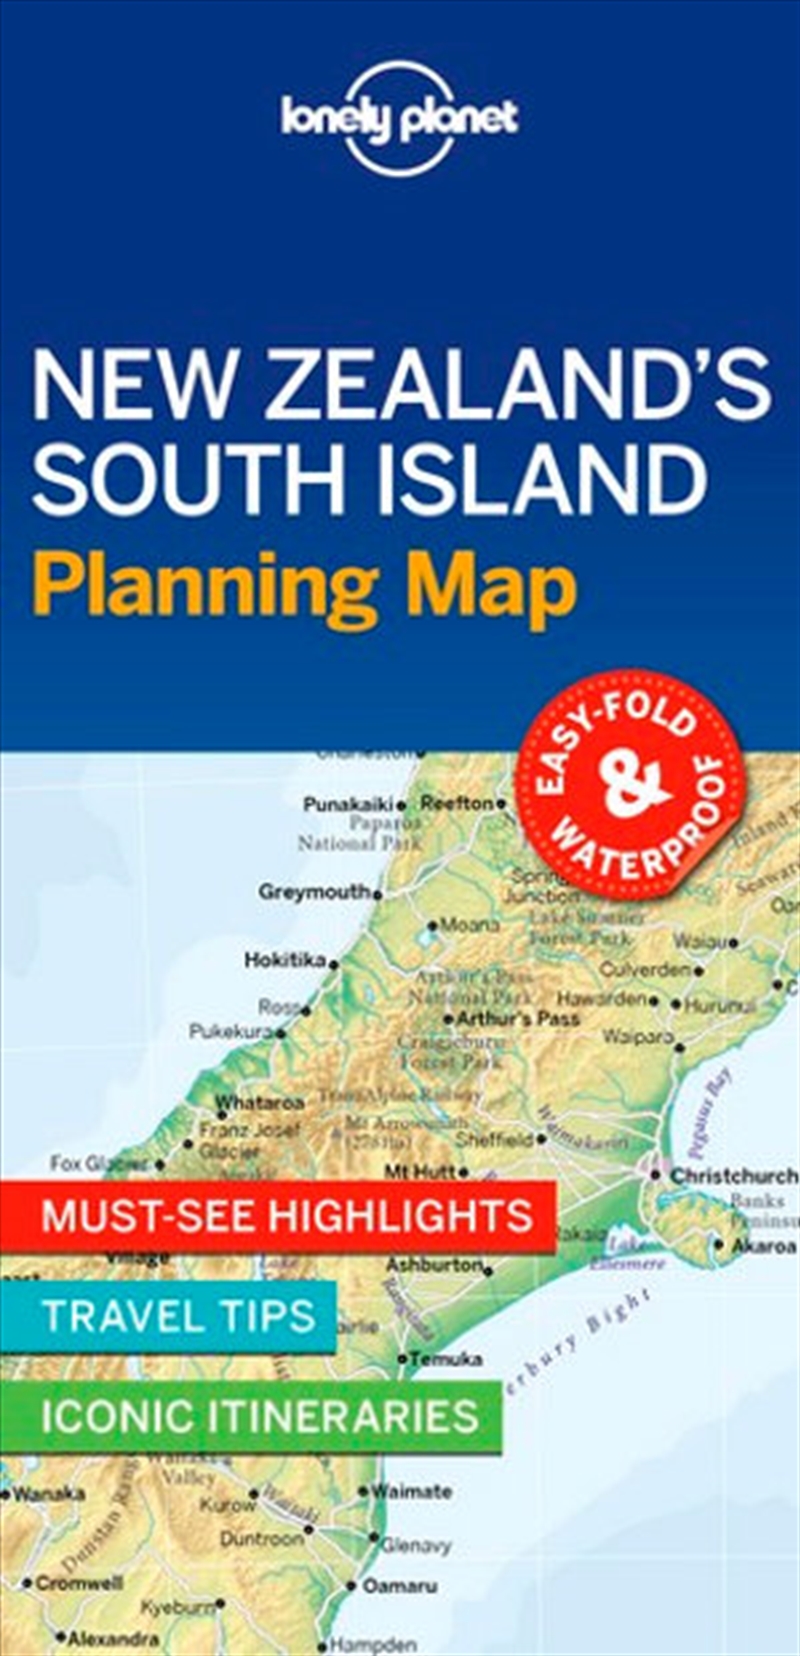 Lonely Planet New Zealand's South Island Planning Map/Product Detail/Travel & Holidays